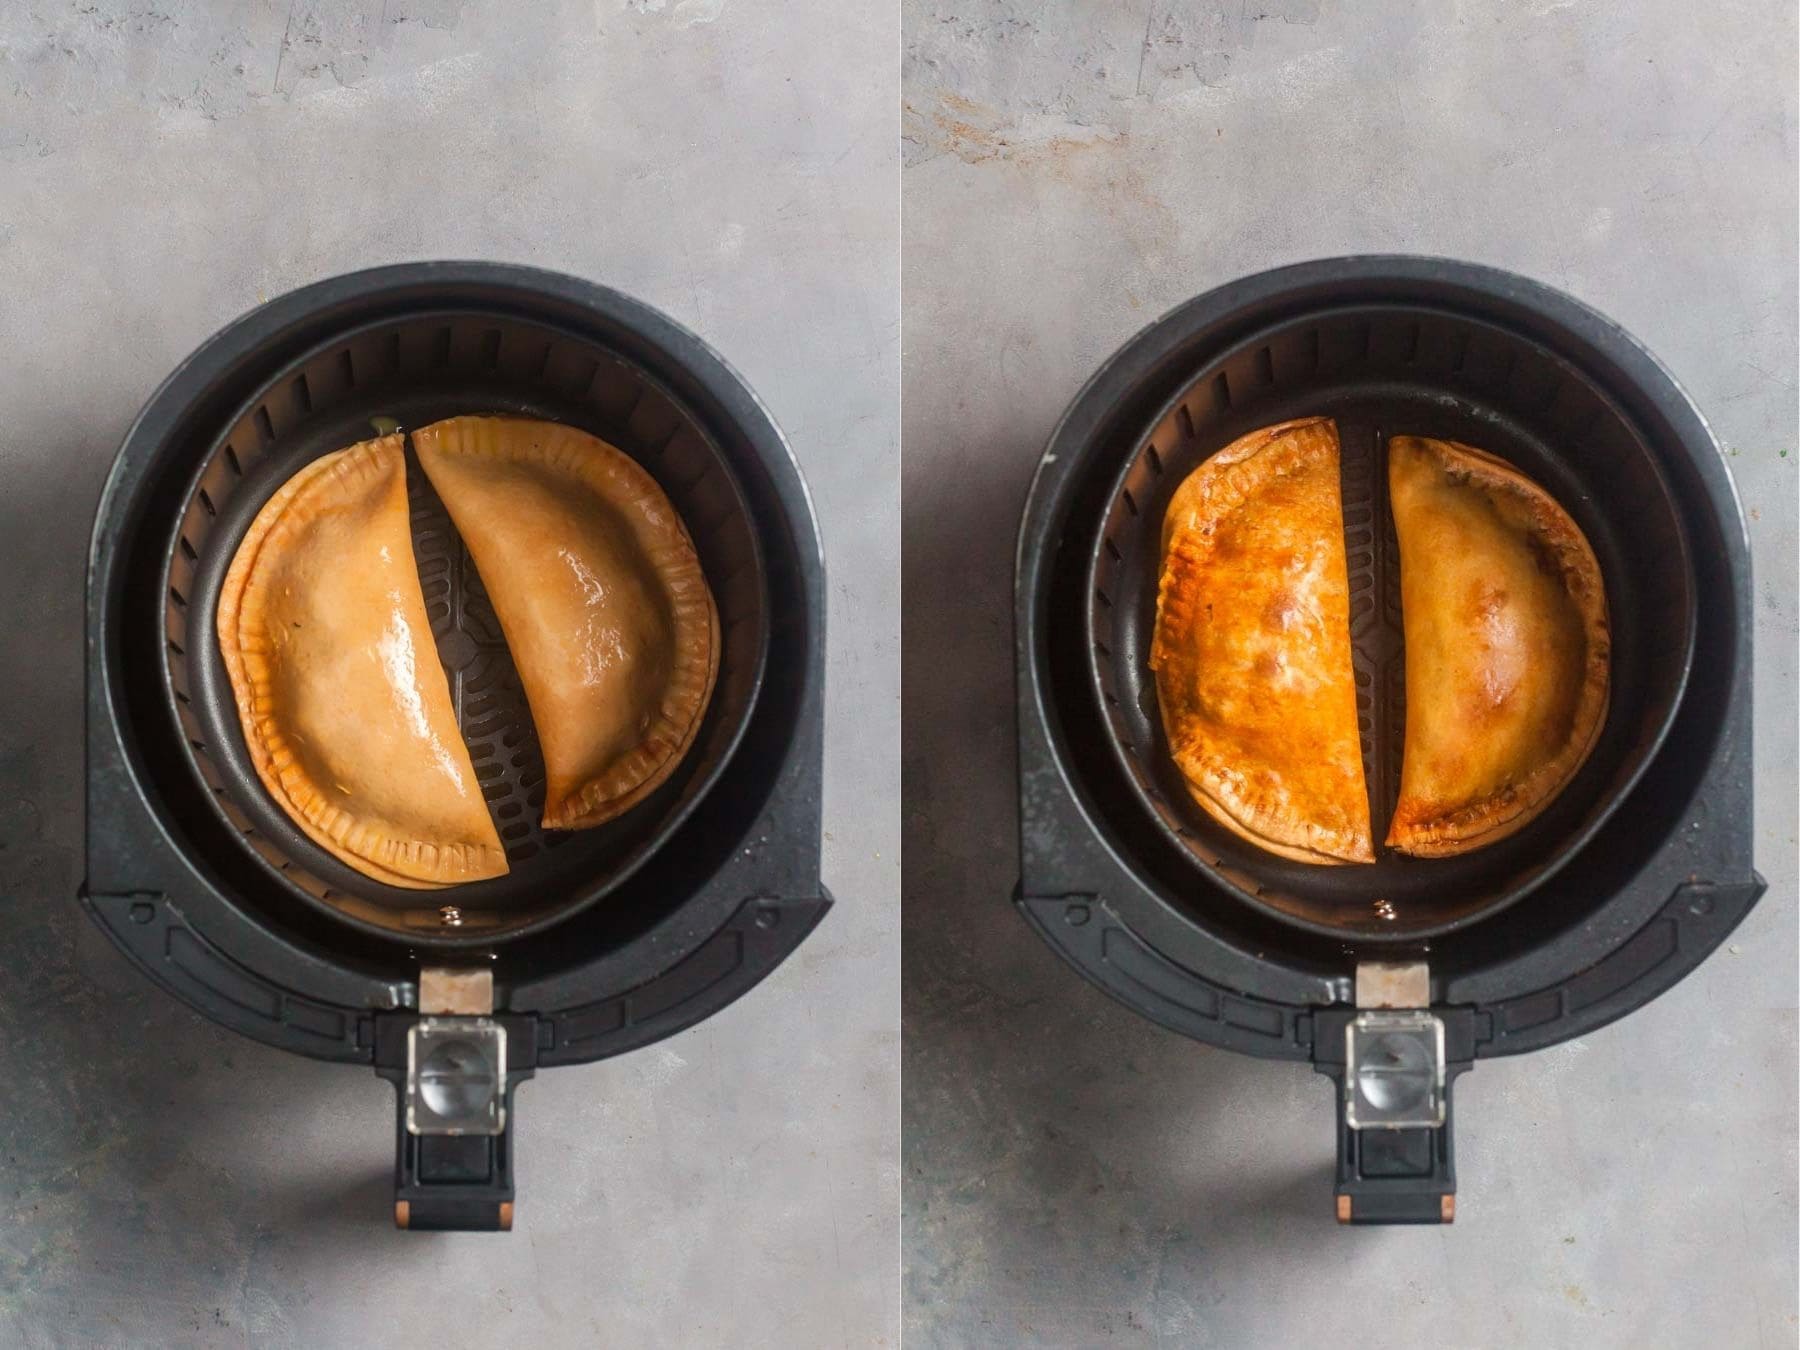 And air fryer basket with empanadas inside. Side by side images show the uncooked empanadas compared to cook empanadas. 